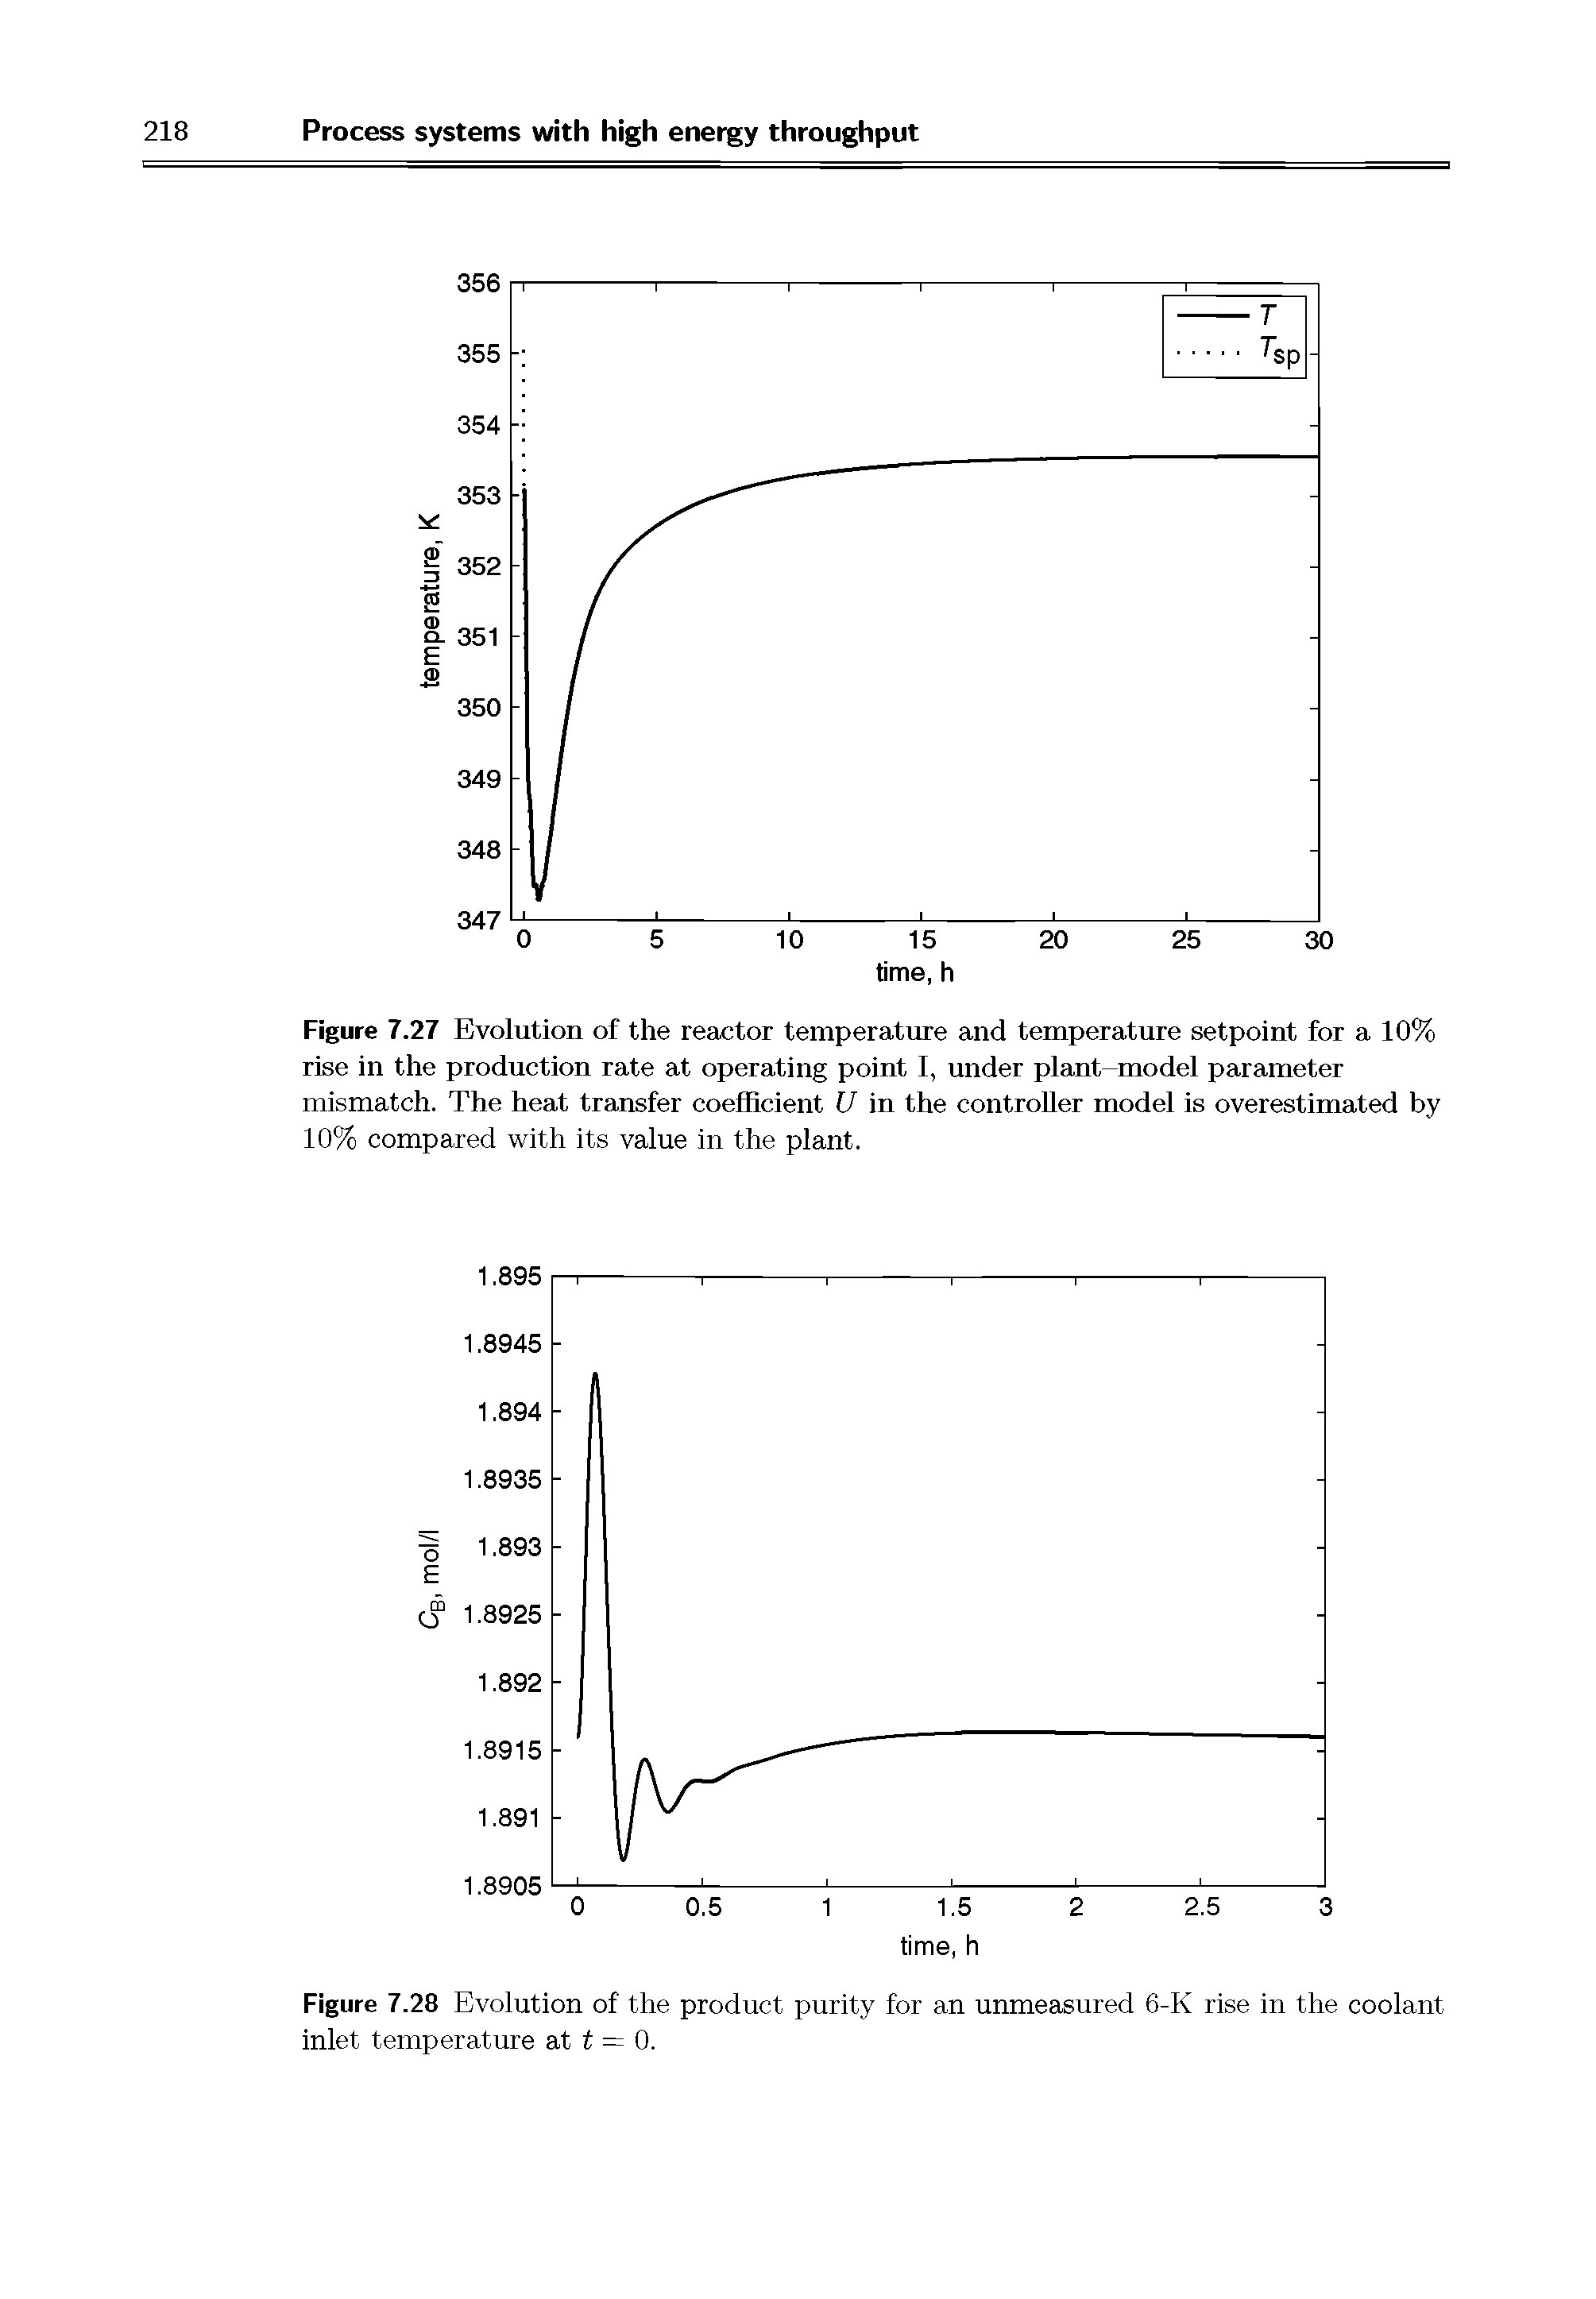 Figure 7.27 Evolution of the reactor temperature and temperature setpoint for a 10% rise in the production rate at operating point I, under plant-model parameter mismatch. The heat transfer coefficient U in the controller model is overestimated by 10% compared with its value in the plant.